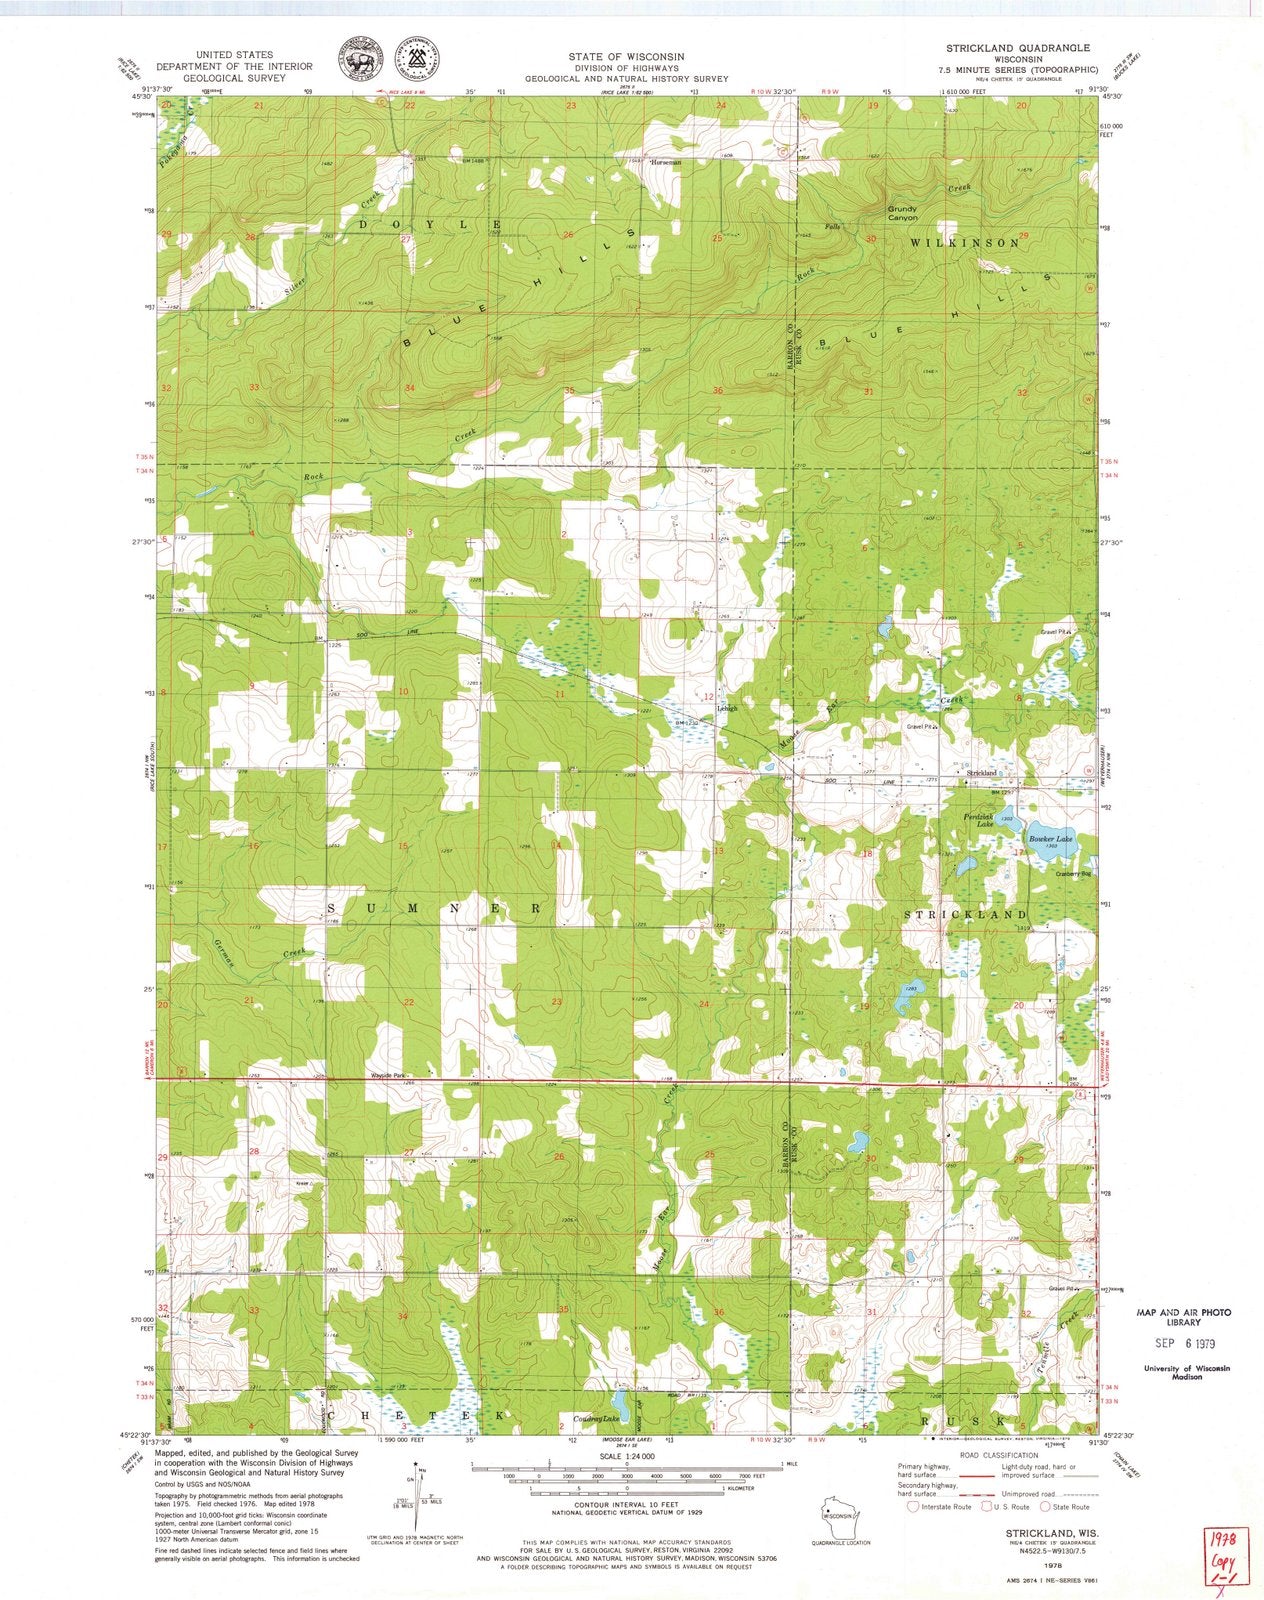 1978 Strickland, WI - Wisconsin - USGS Topographic Map